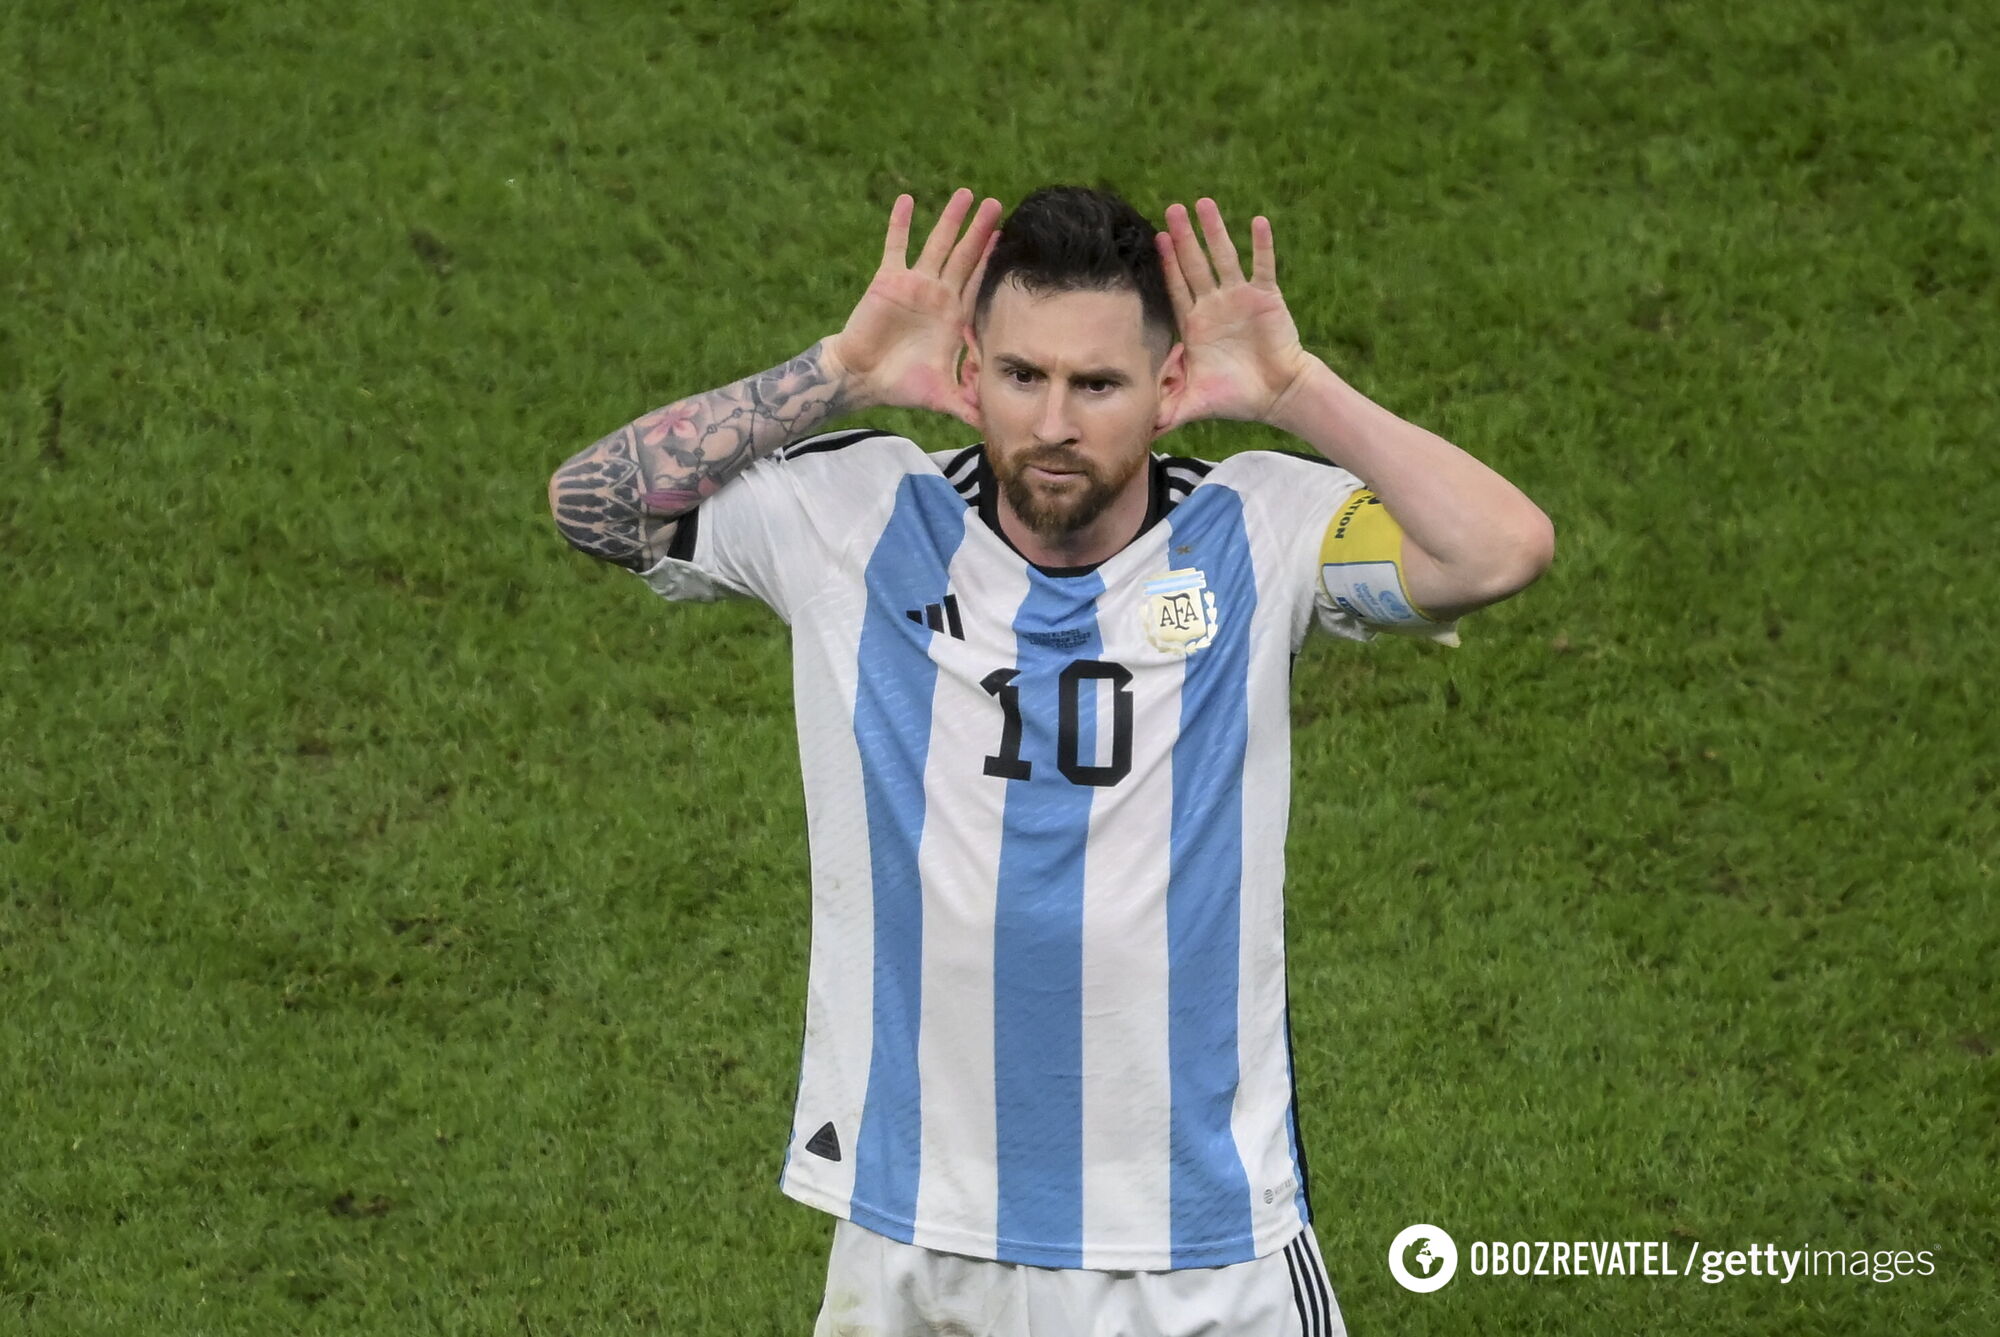 ''It was a disgrace. A provocation'': 2022 World Cup referee lashes out at Messi